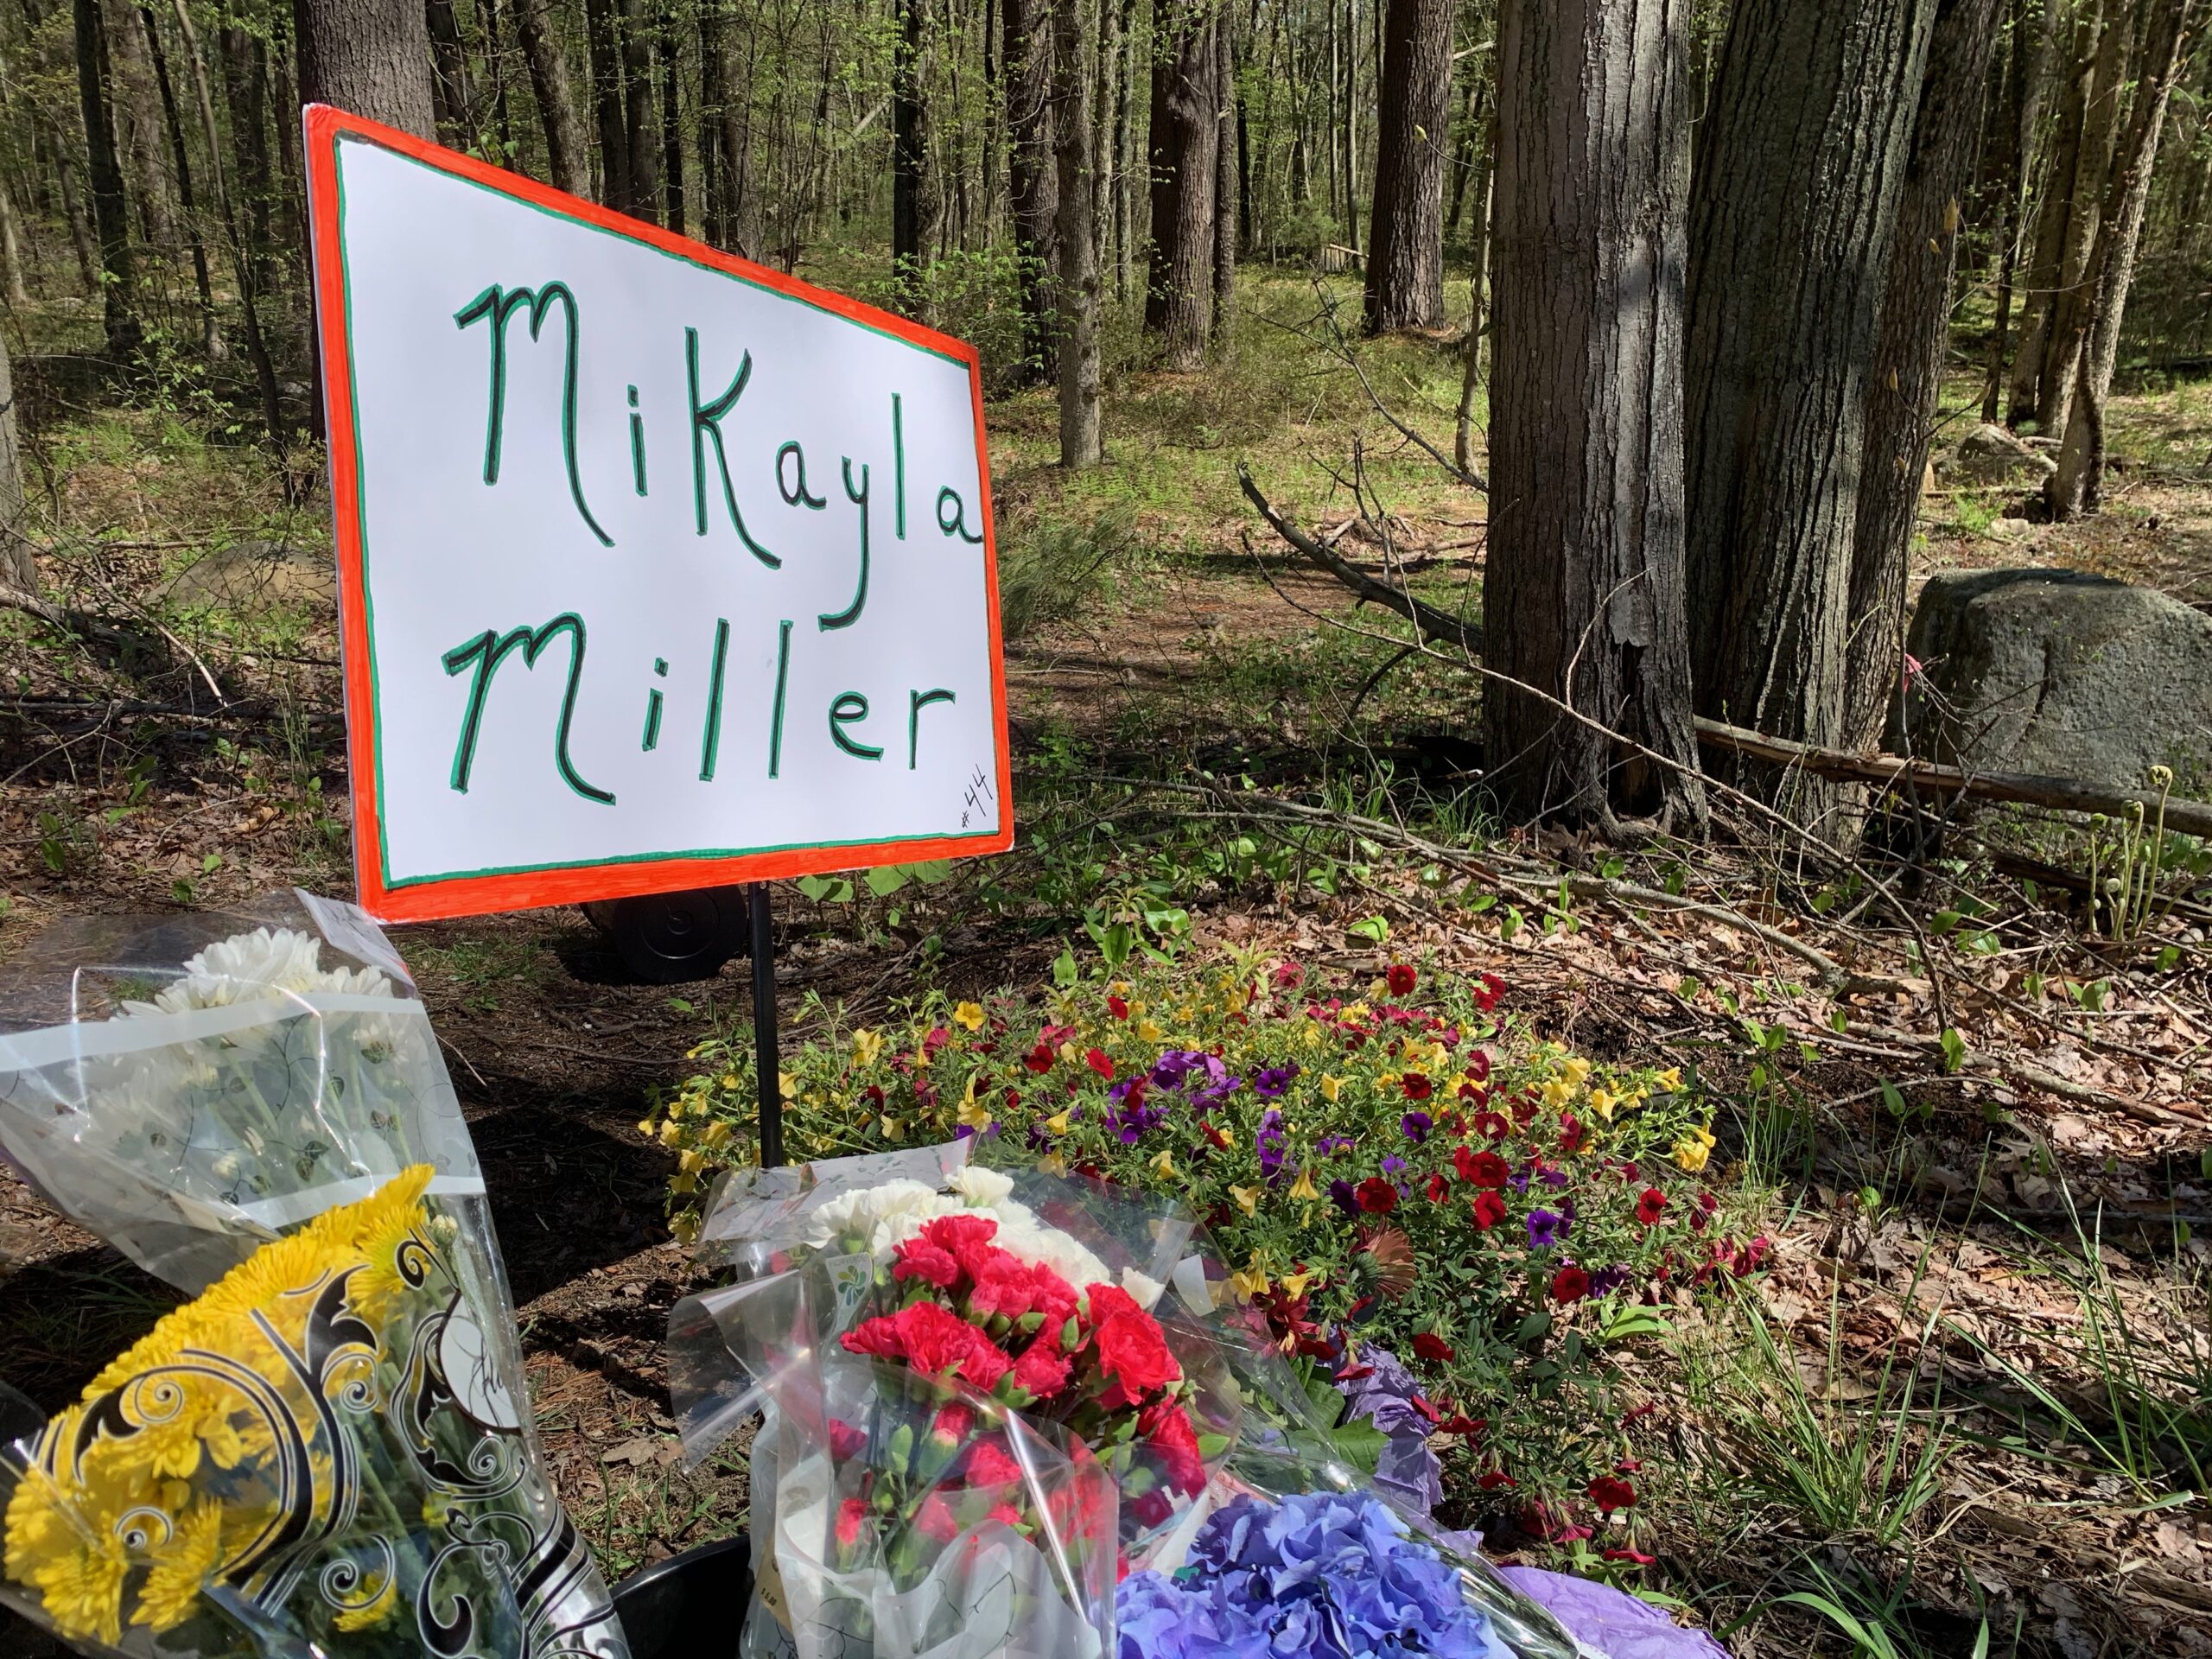 Medical examiner reportedly concludes Mikayla Miller’s death was suicide